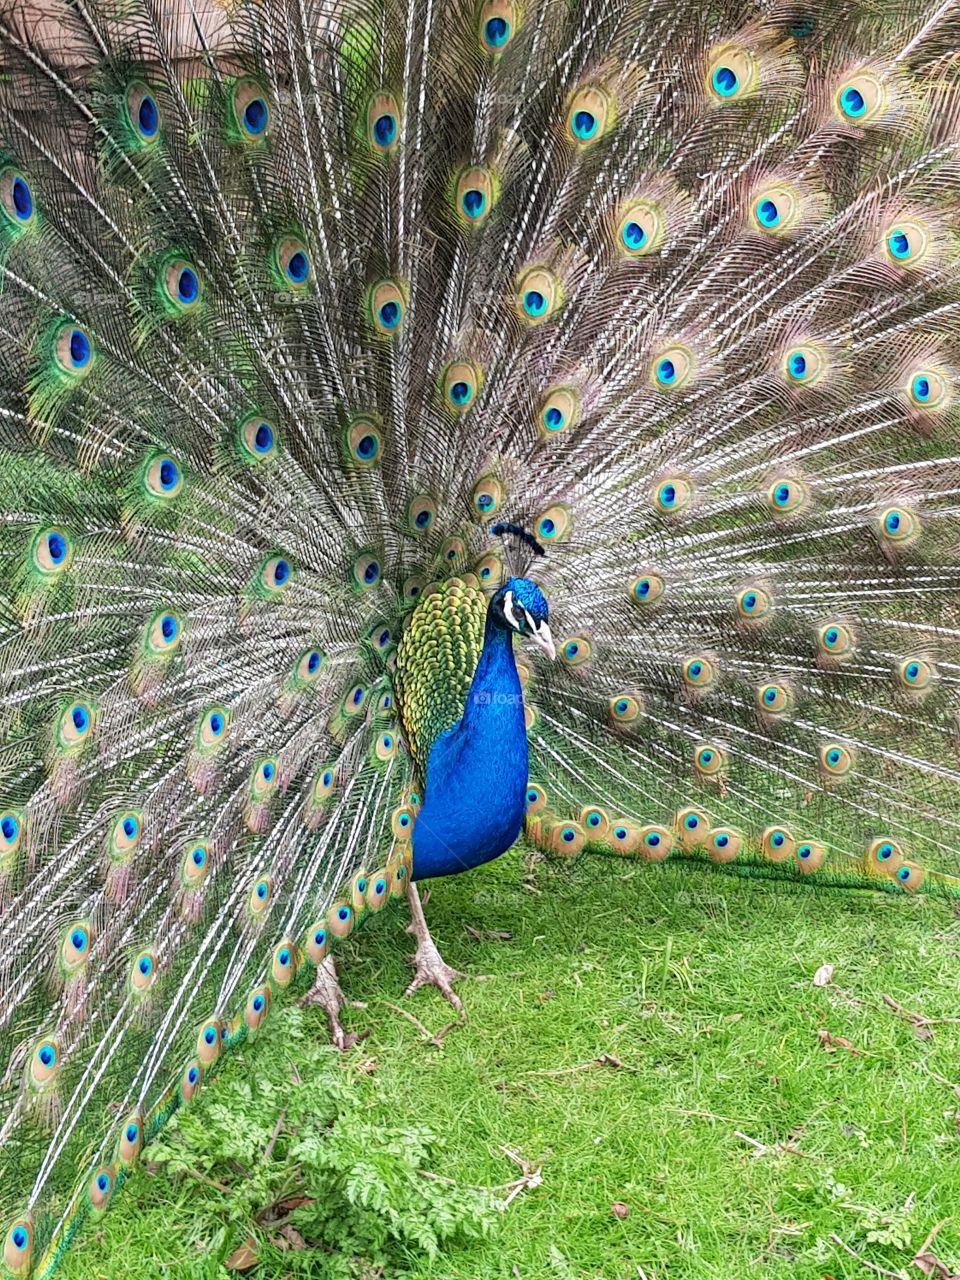 Proud peacock showing off